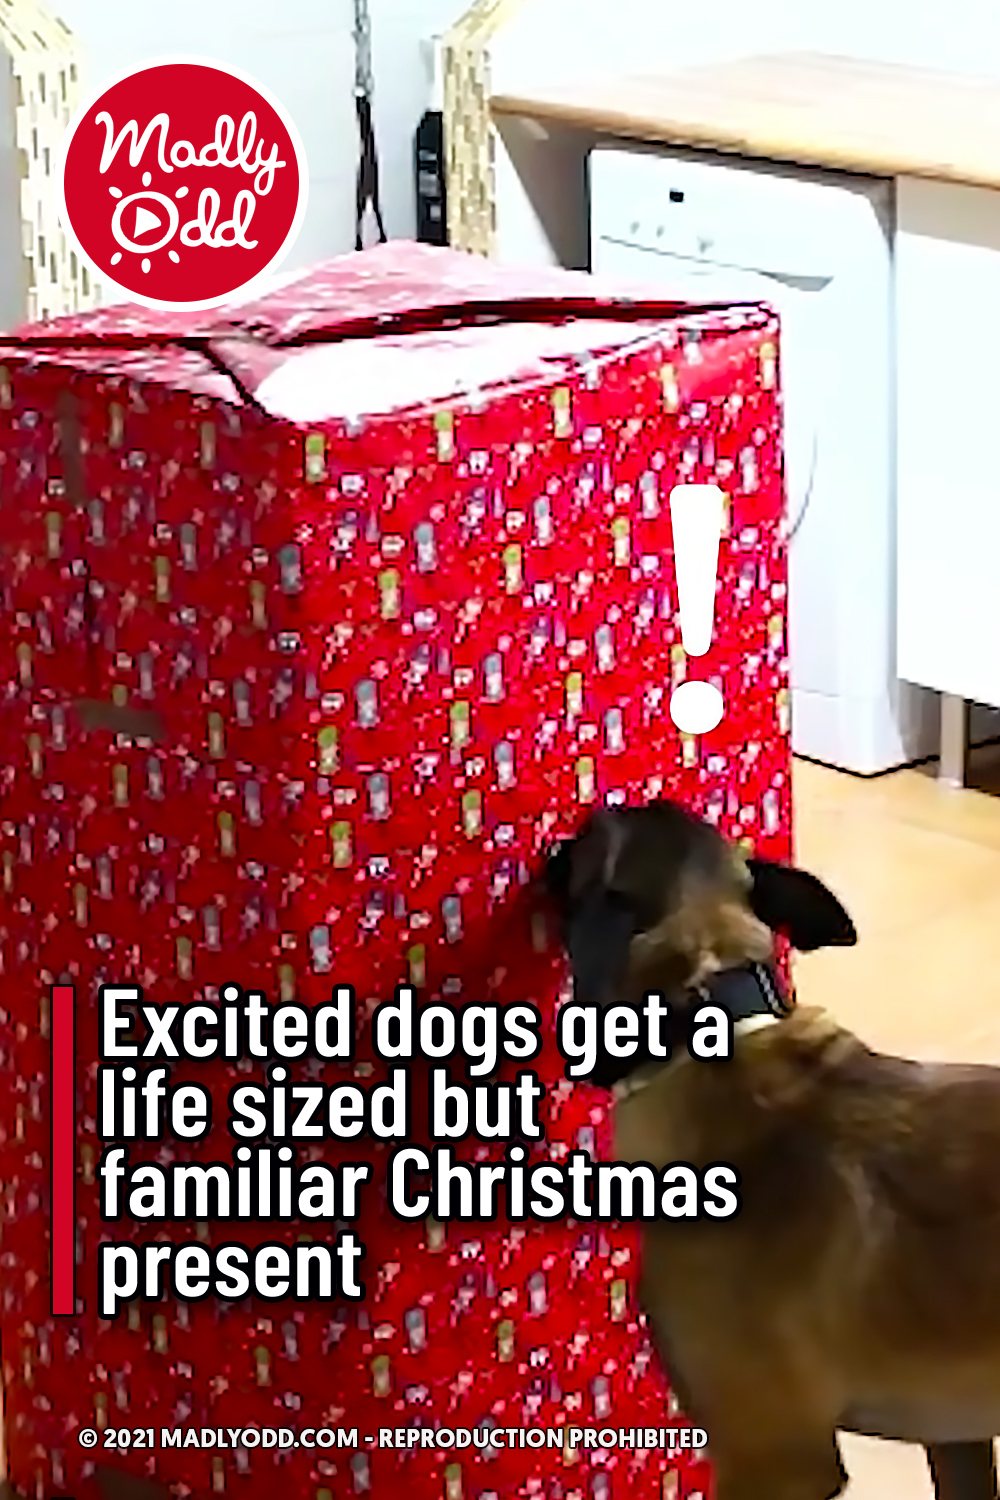 Excited dogs get a life sized but familiar Christmas present